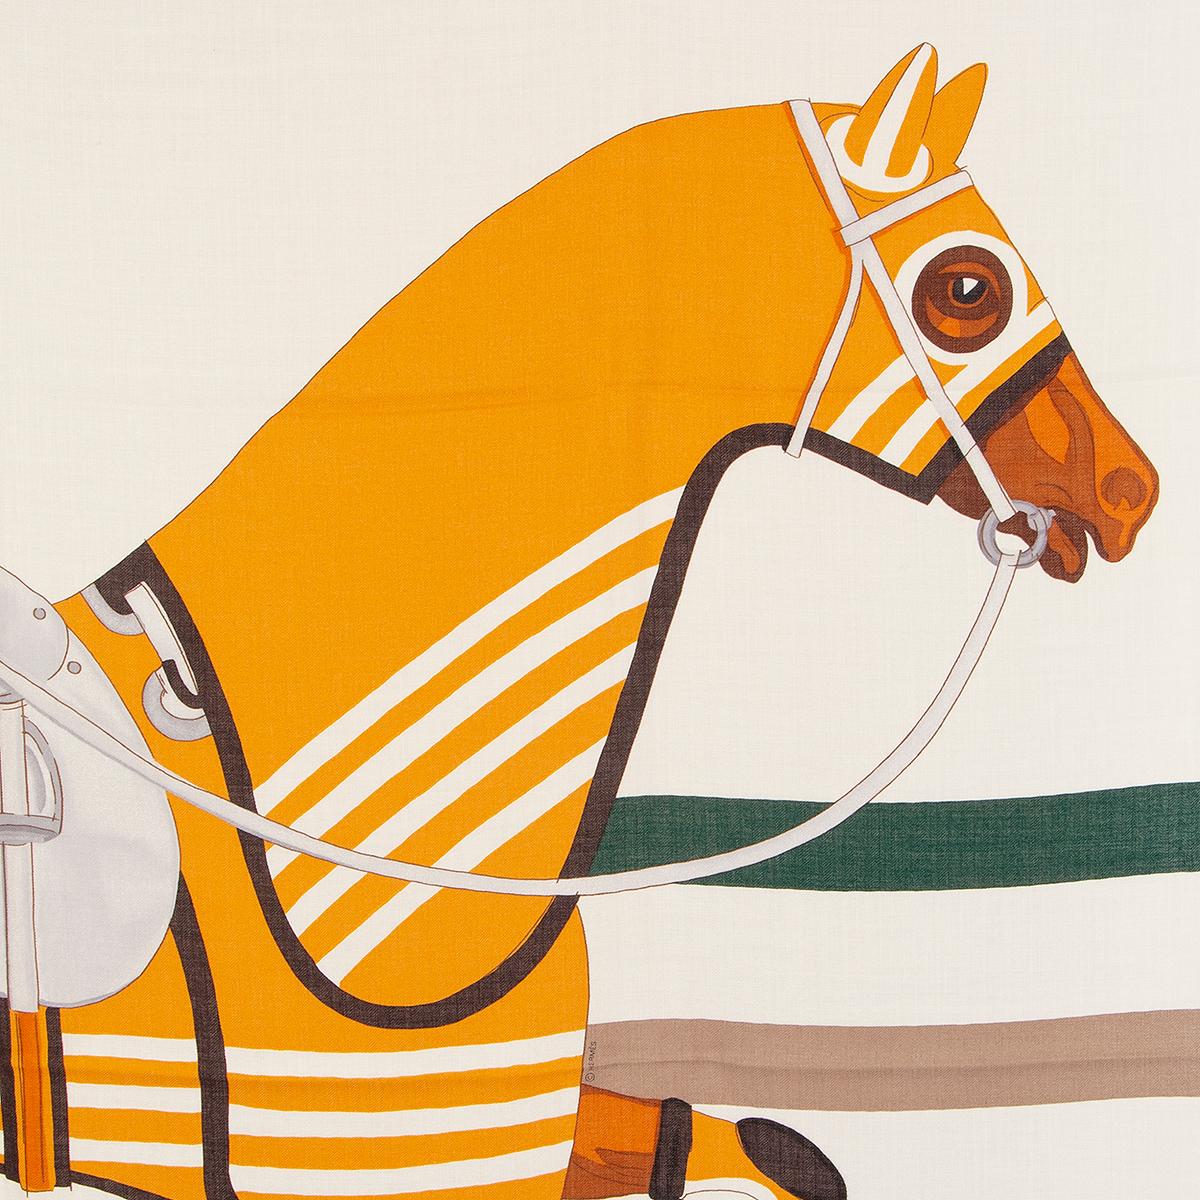 Hermès 'Cheval a la Couverture' shawl in mustard, off-white, brown, cognac,  forest green, and periwinkle cashmere (70%) and silk (30%). May have been worn and is in virtually new condition.  No Box.

Width 140cm (54.6in)
Height 140cm (54.6in)